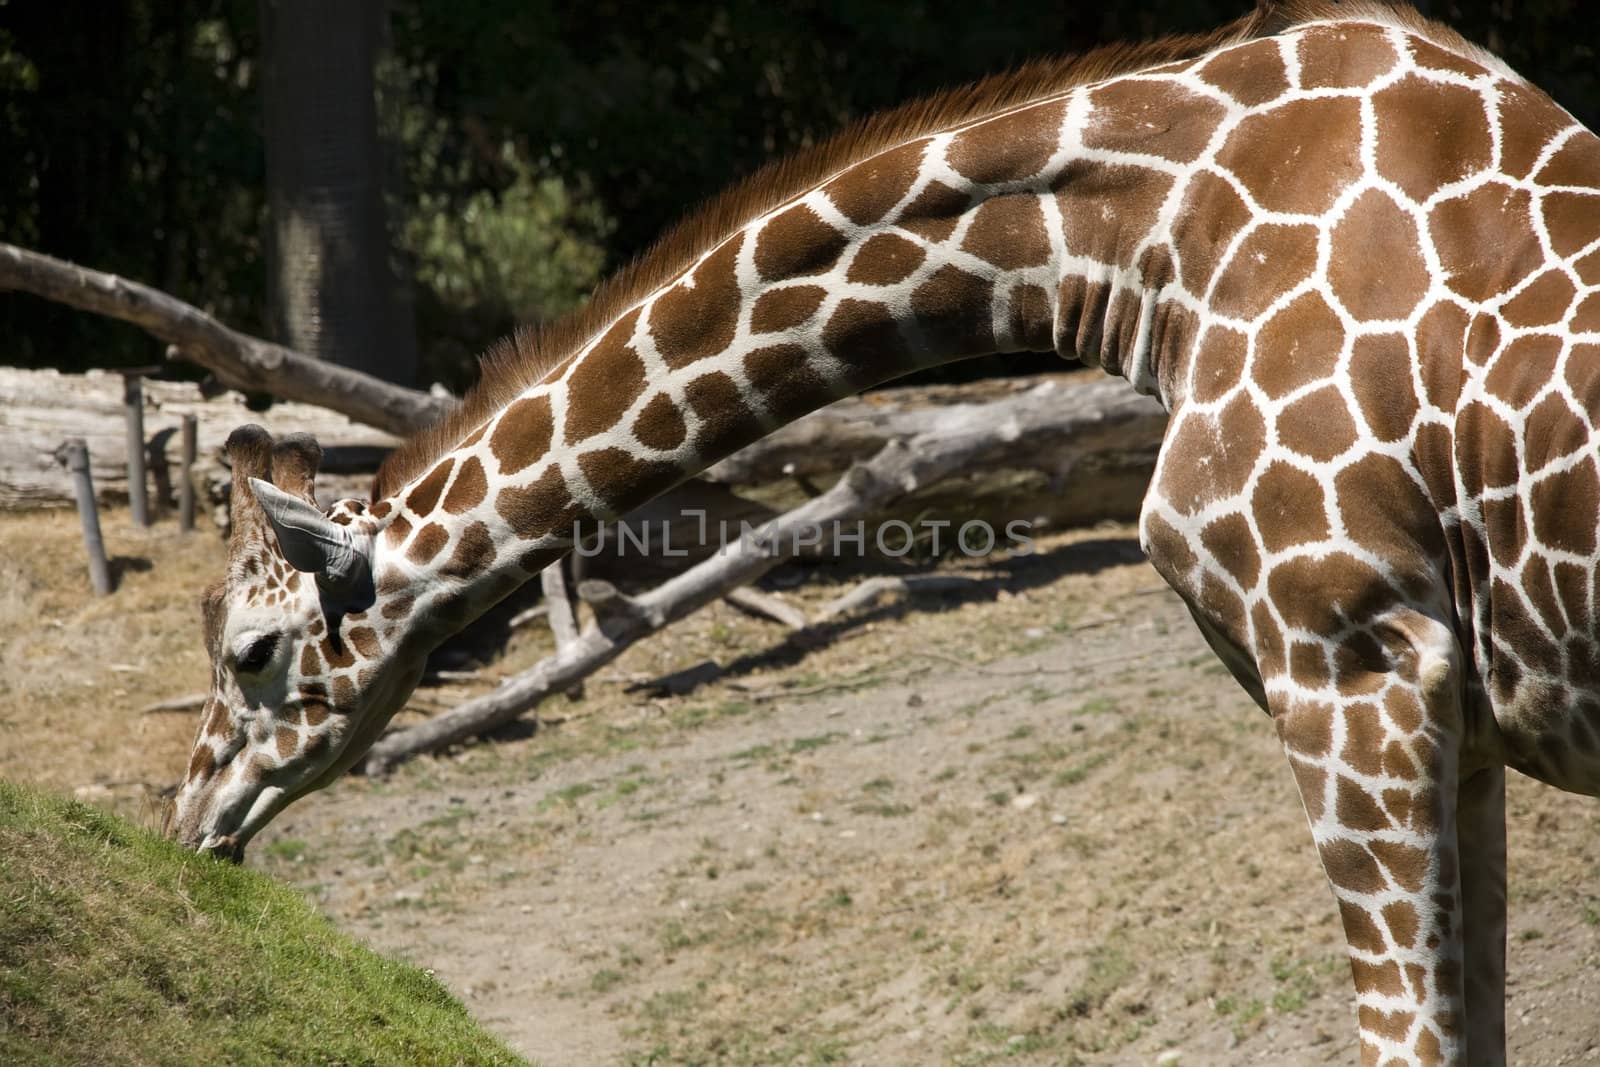 Reticulated Brown and White Giraffe Stretching Neck and Eating Grass, Giraffa Cameolpardalis

Resubmit--In response to comments from reviewer have further processed image to reduce noise, sharpen focus and adjust lighting.